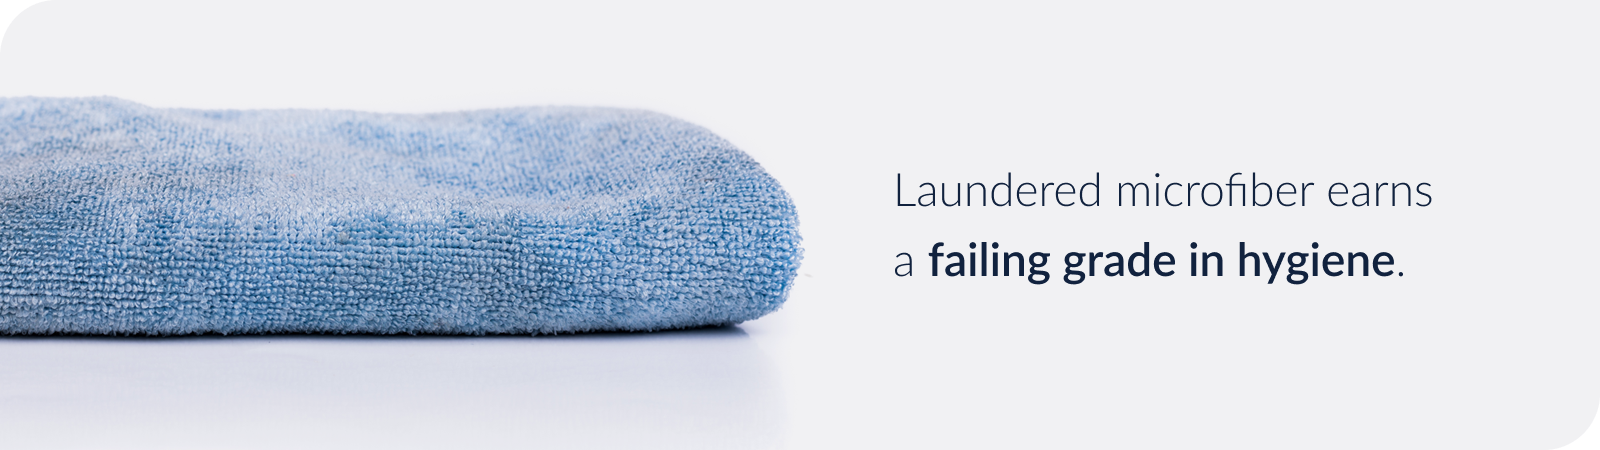 Laundered microfiber earns a failing grade in hygiene.